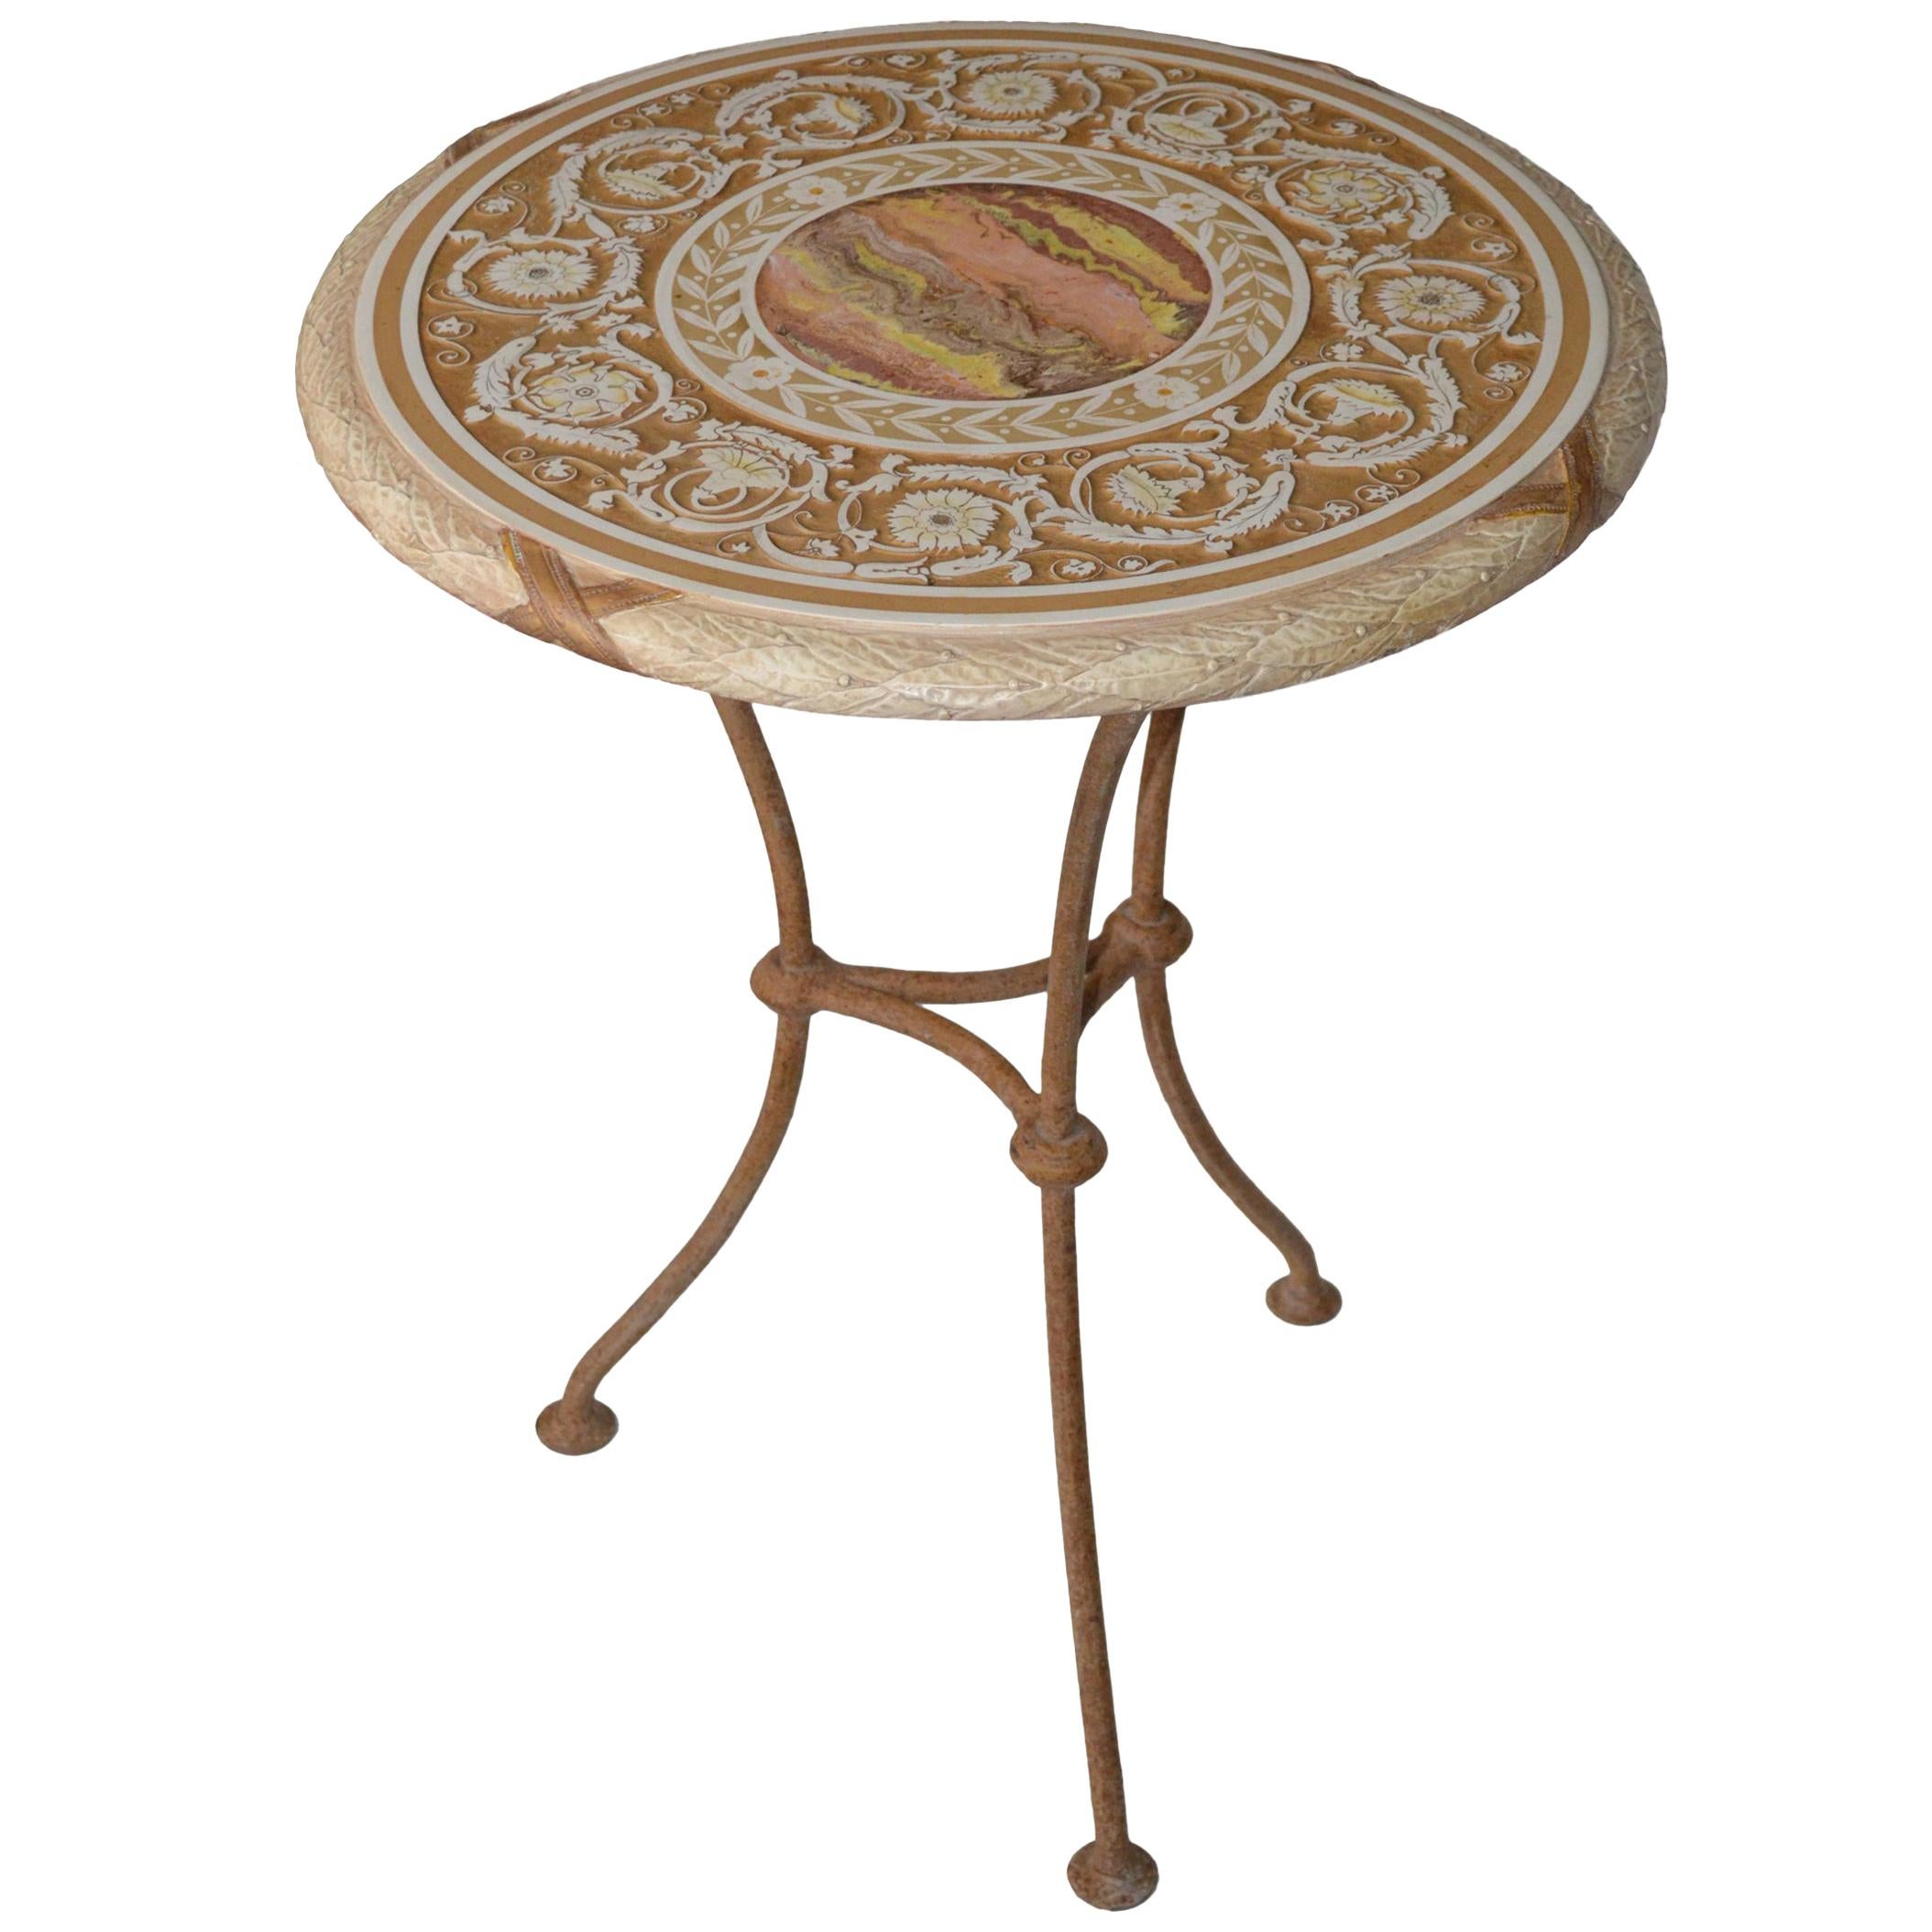 This table can be used as tea table, side table, lamp table it has multiple uses.
The top is manufactured by our Italian craftsmen in Scagliola art inlay and bas-relief, same technique of the 